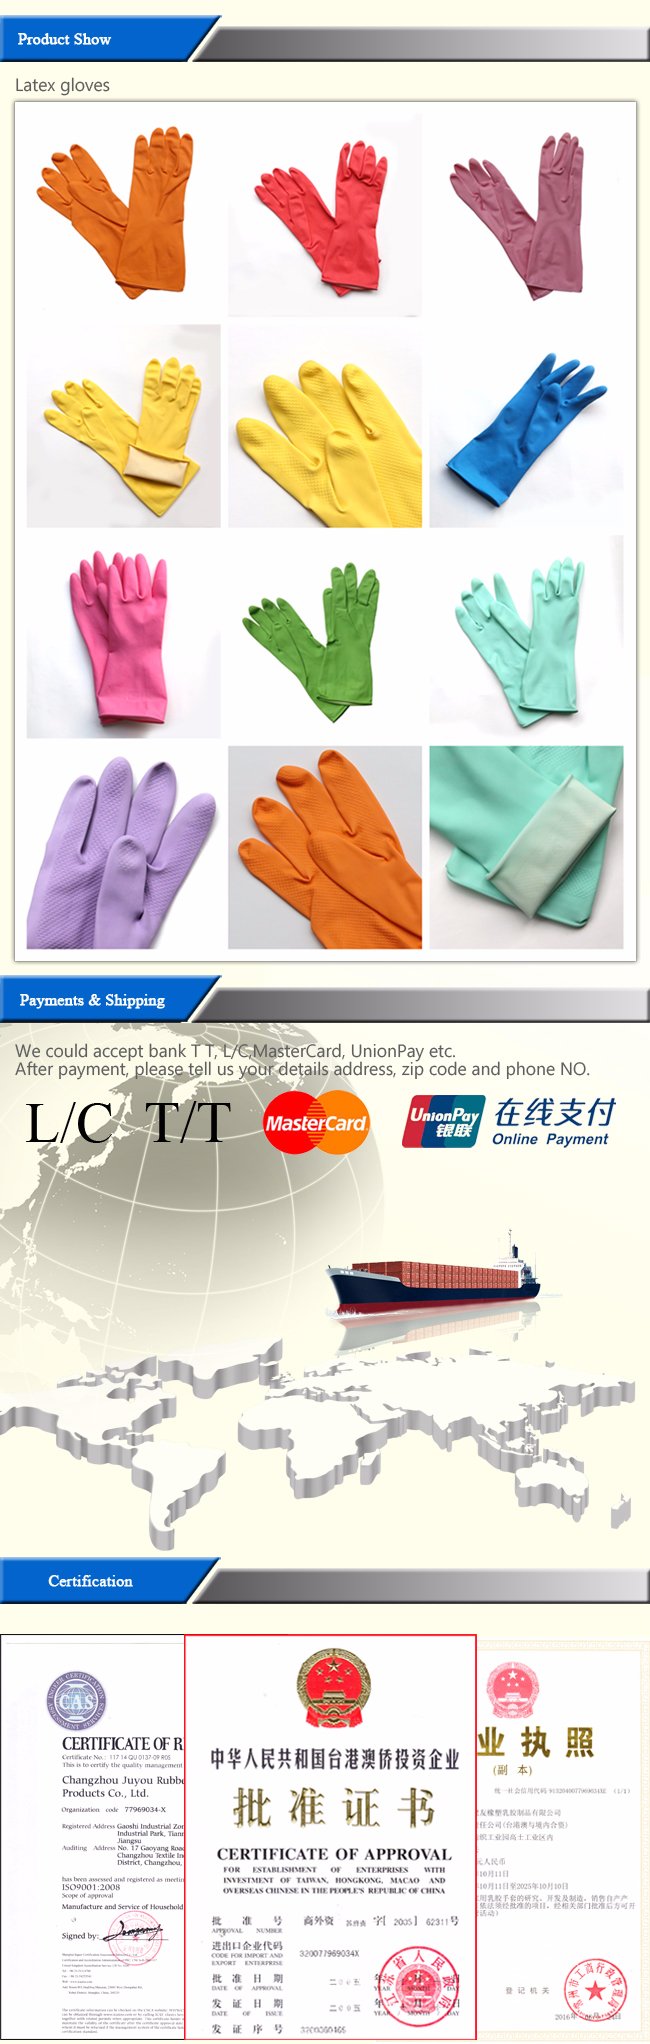 New Safety Latex Working Gloves for Washing Stuff with High Quality